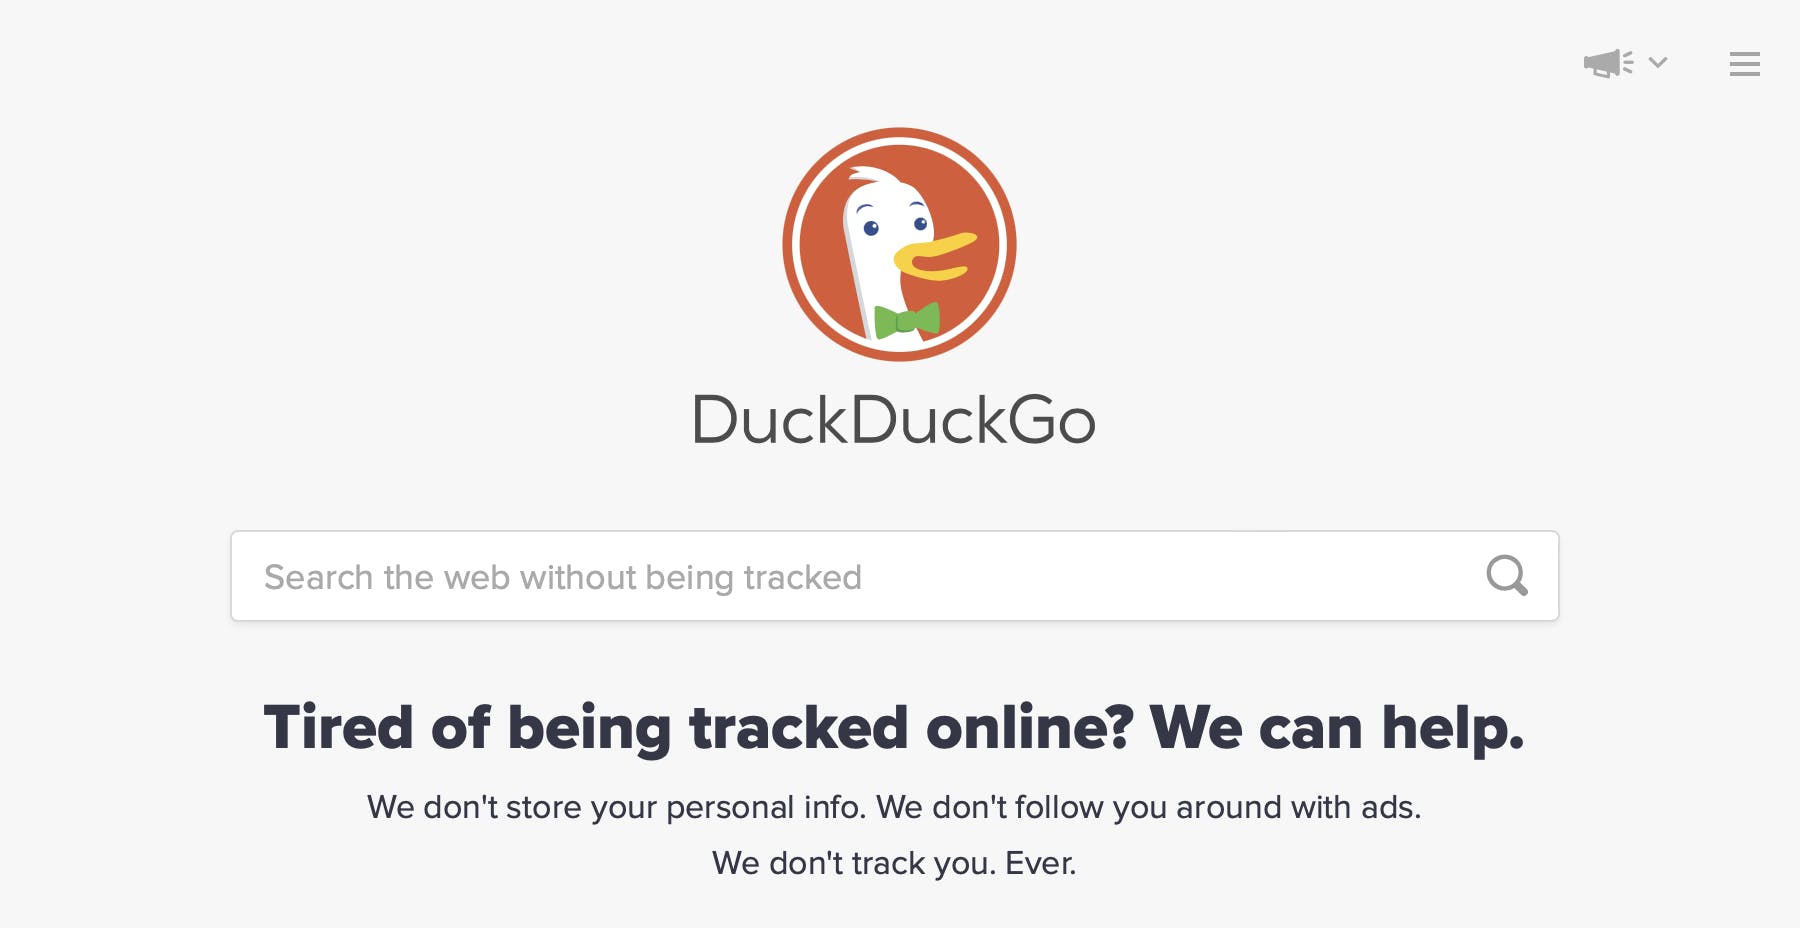 DuckDuckGo Home Screen. Search bar says "Search the web without being tracked". Headline: Tired of being tracked online? We can help. We don't store your personal info. We don't follow you around with ads. We don't track you. Ever.